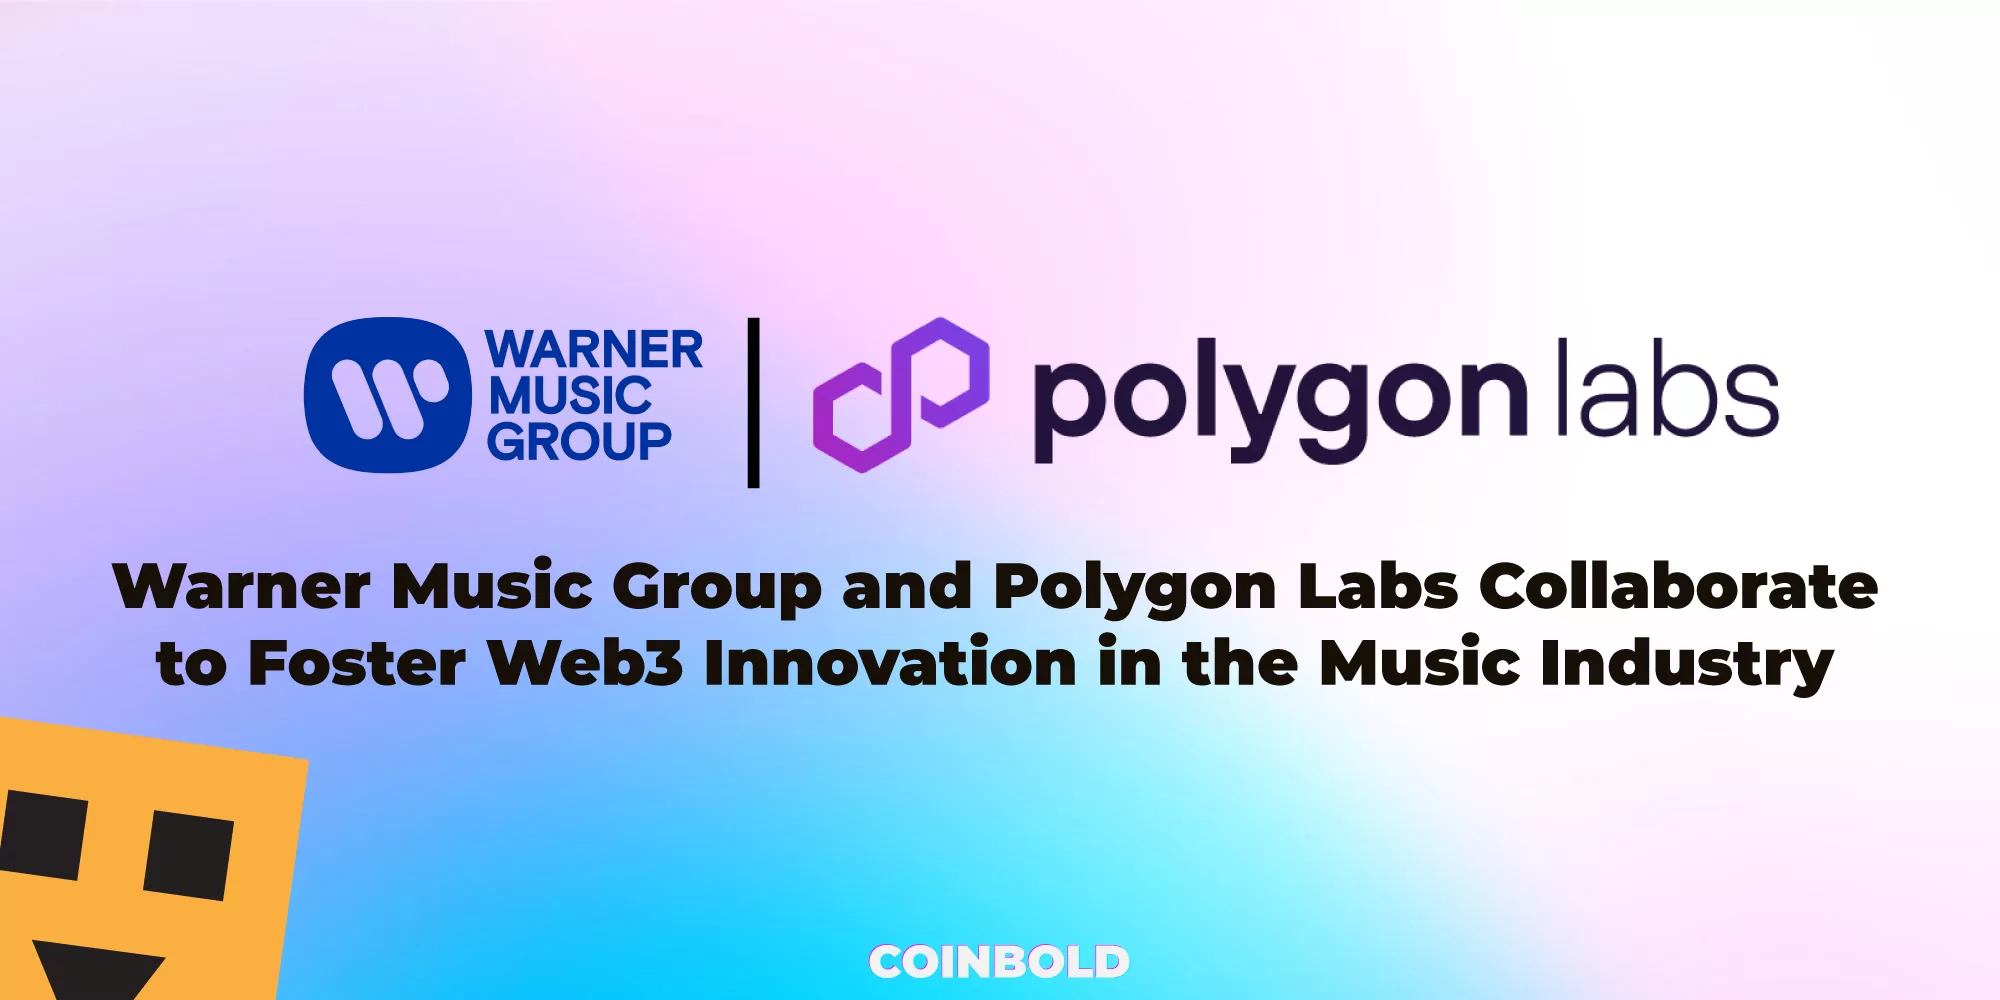 Warner Music Group and Polygon Labs Collaborate to Foster Web3 Innovation in the Music Industry